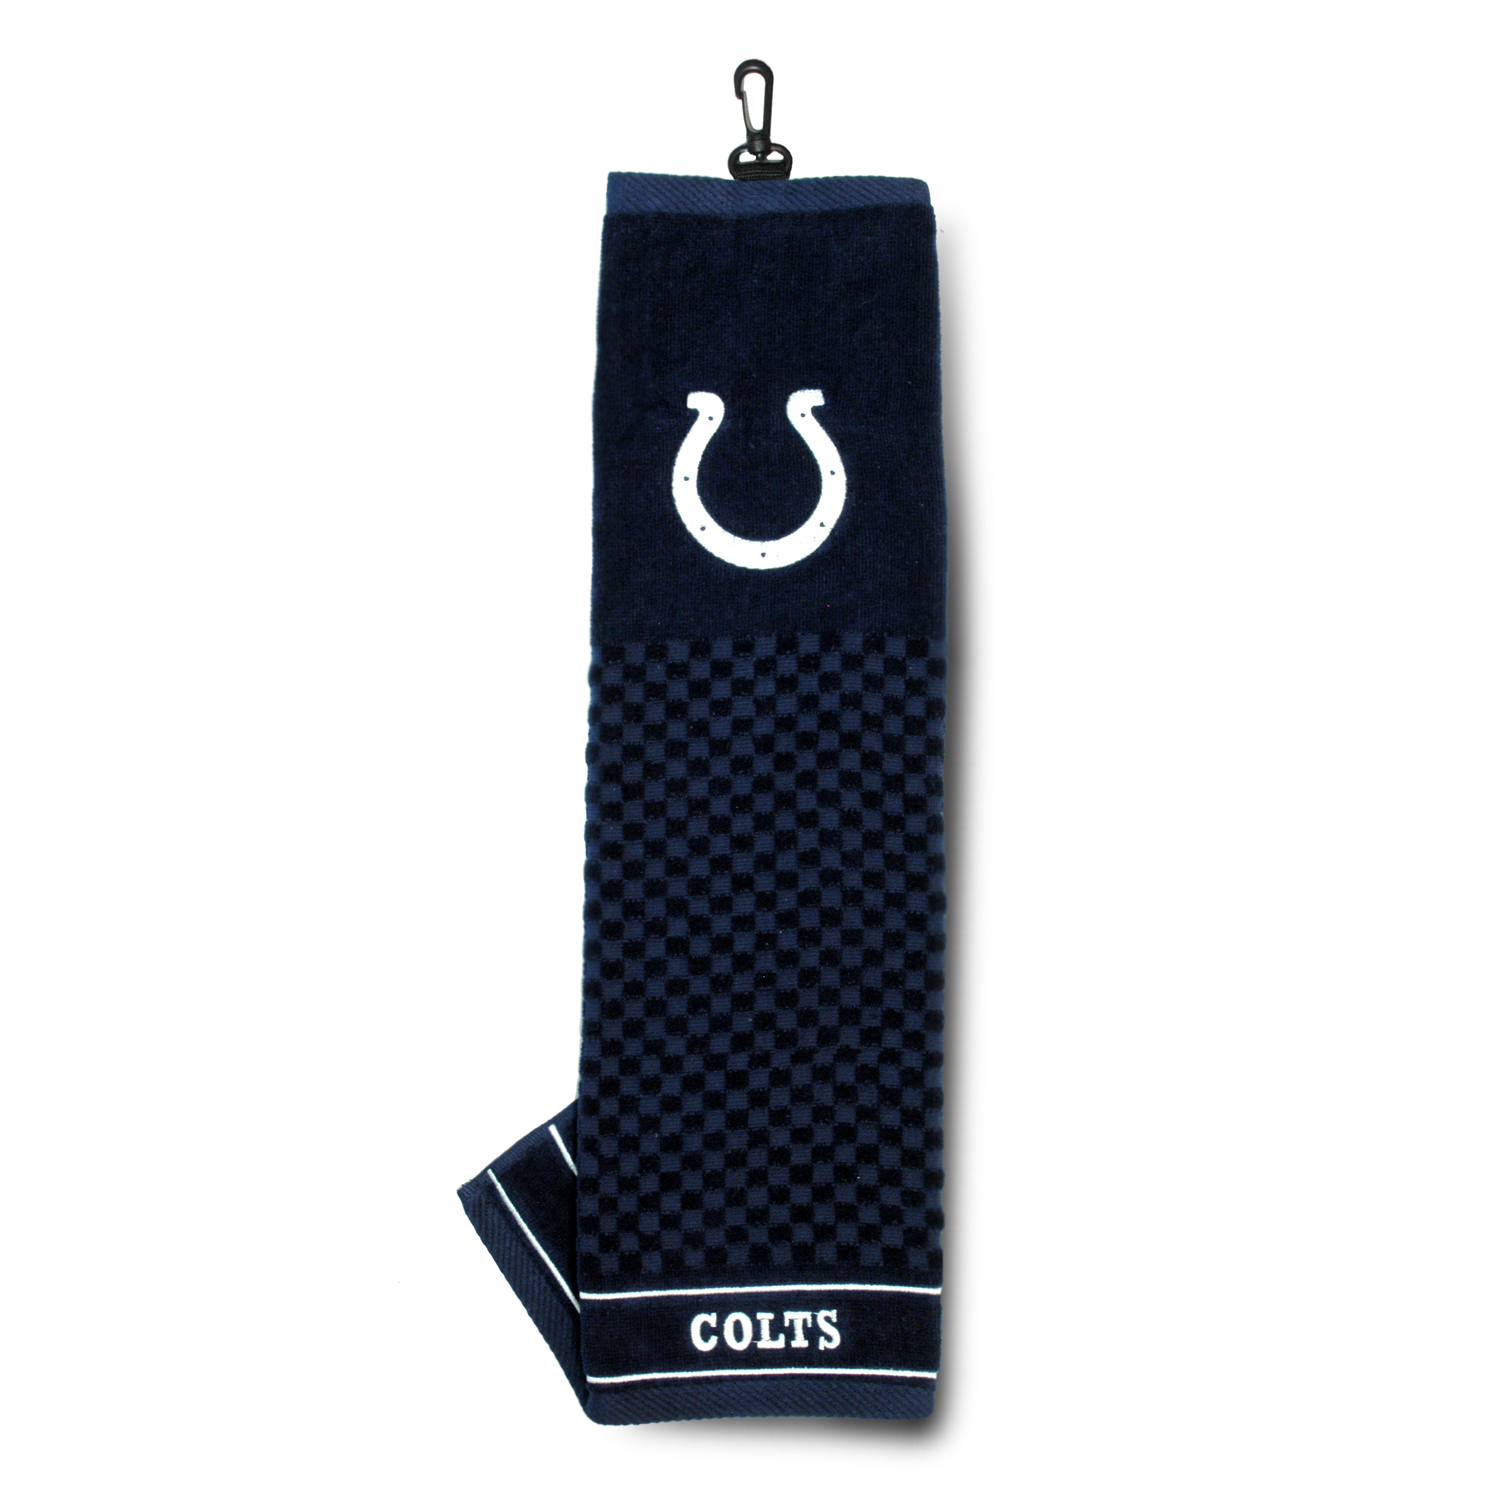 Indianapolis Colts Embroidered Towel